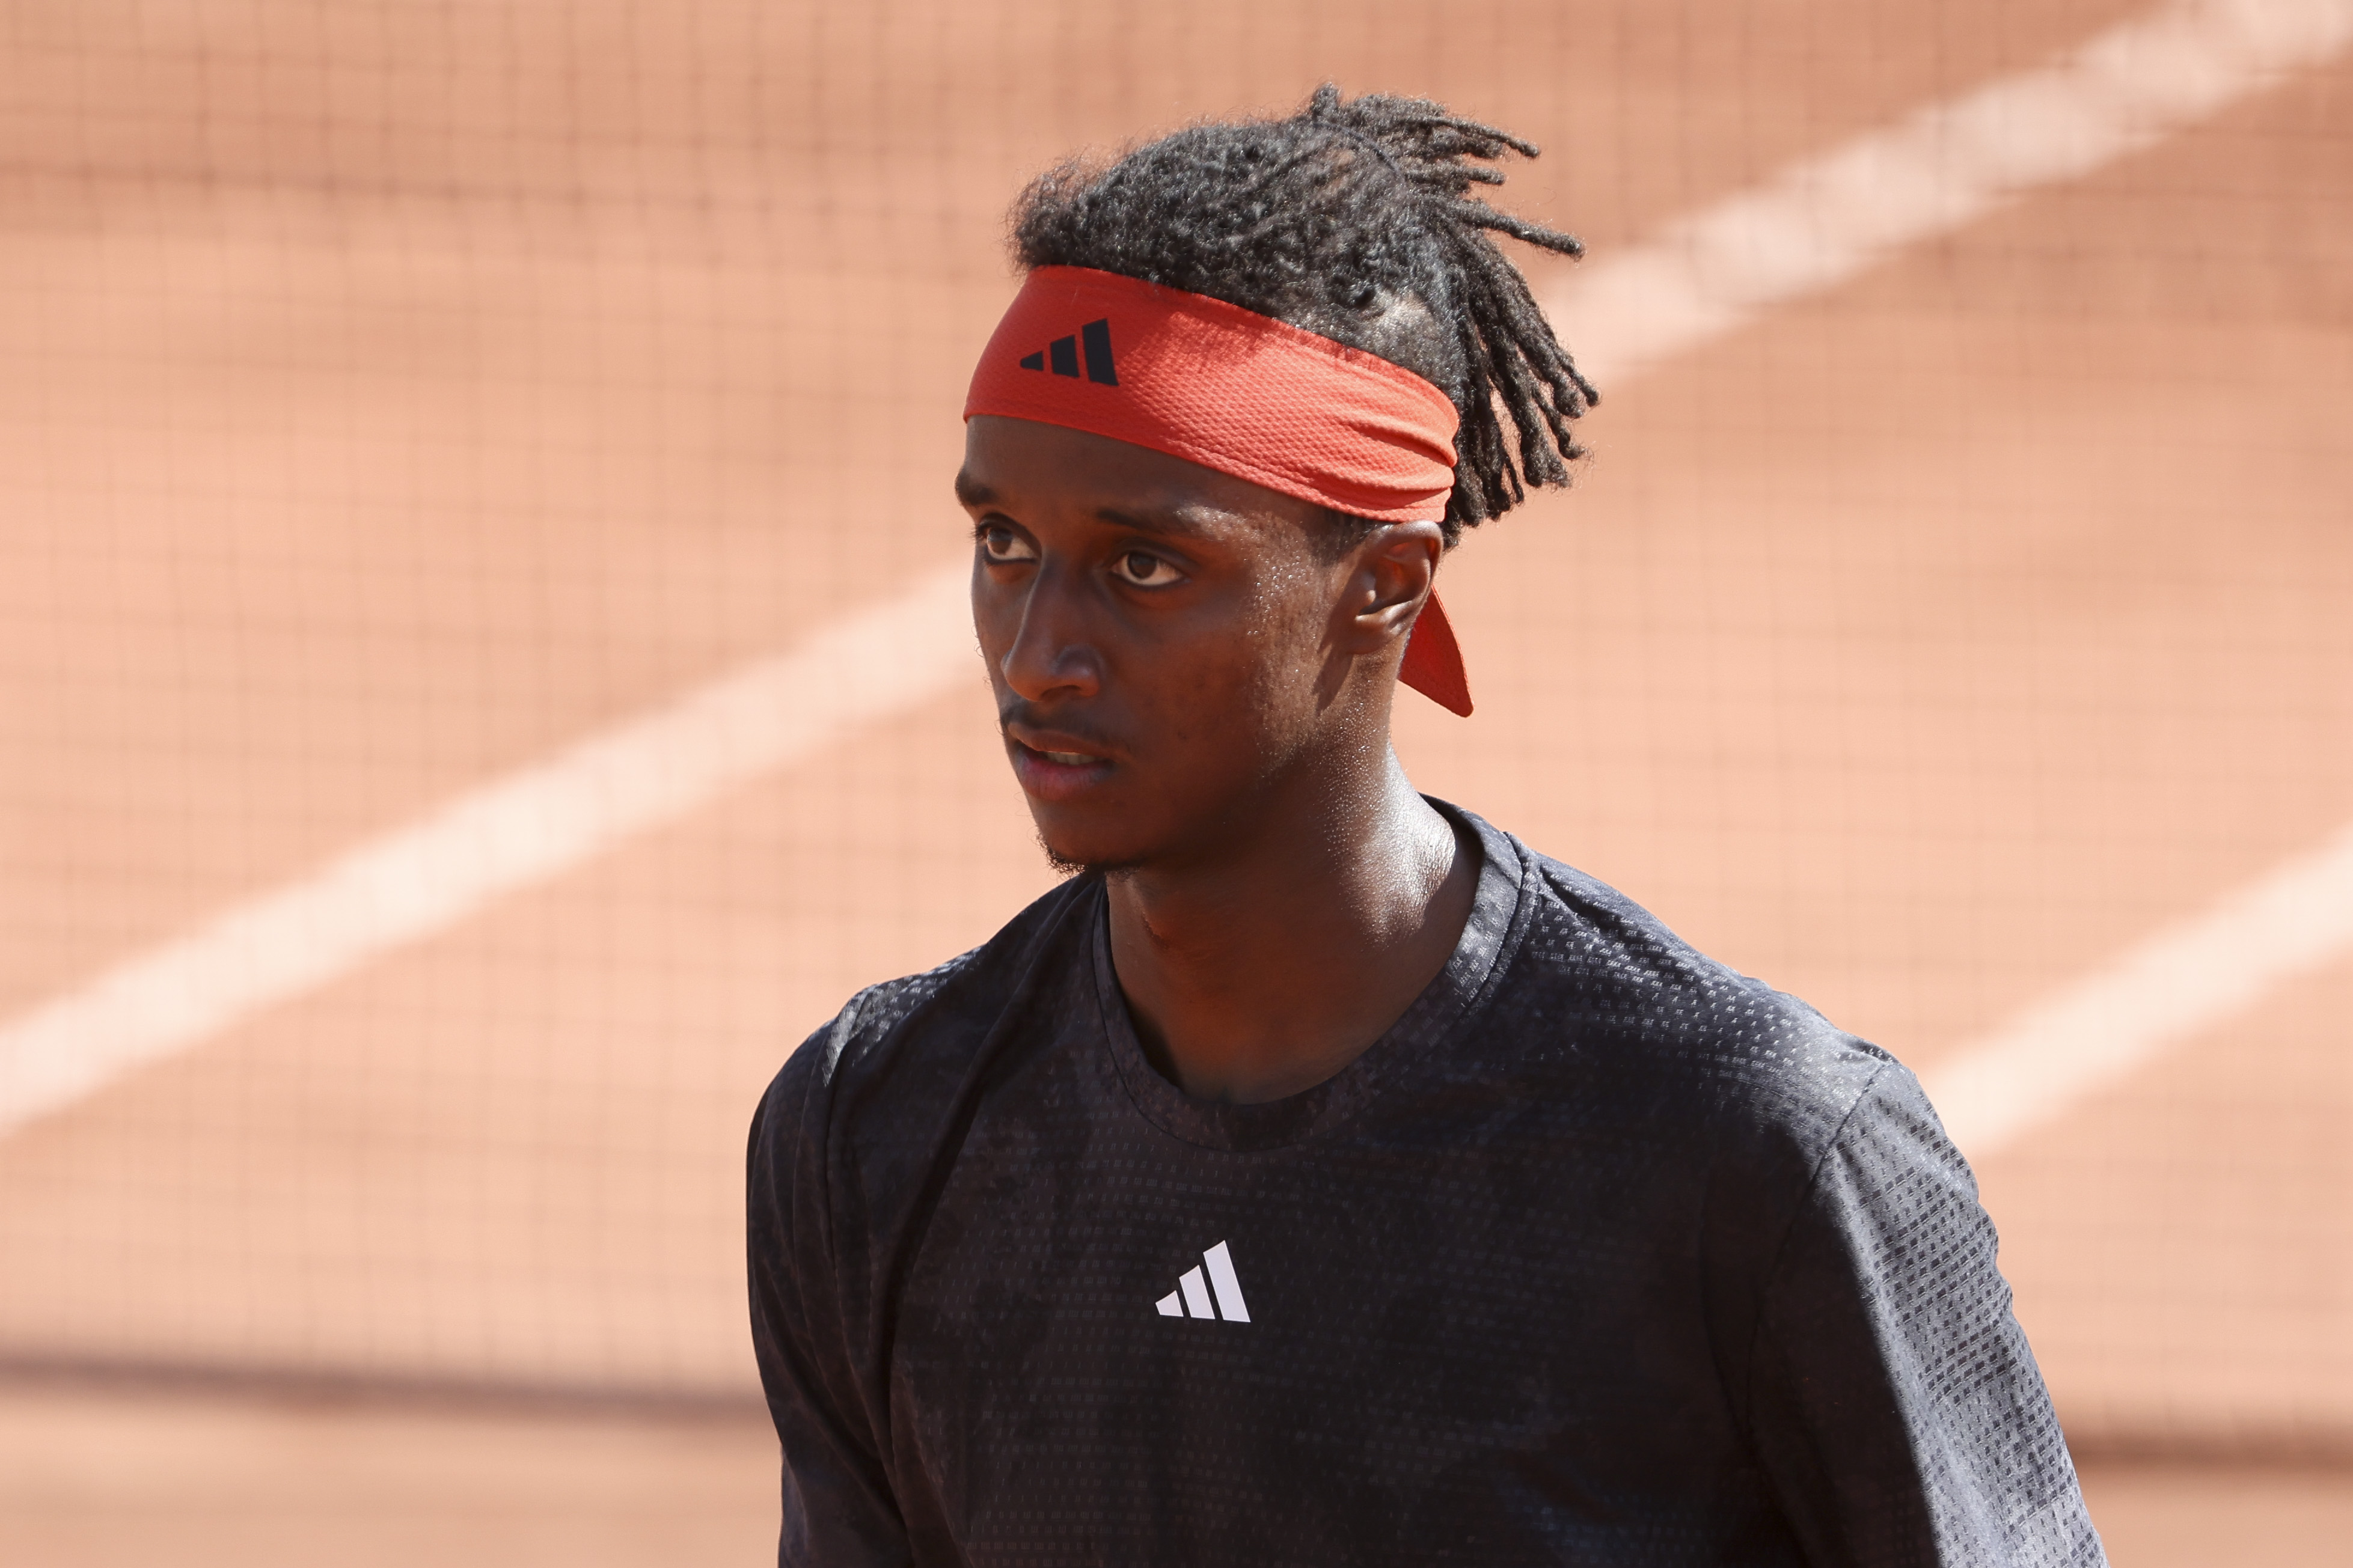 Mikael Ymer abruptly retires from tennis following 18-month doping ban in July